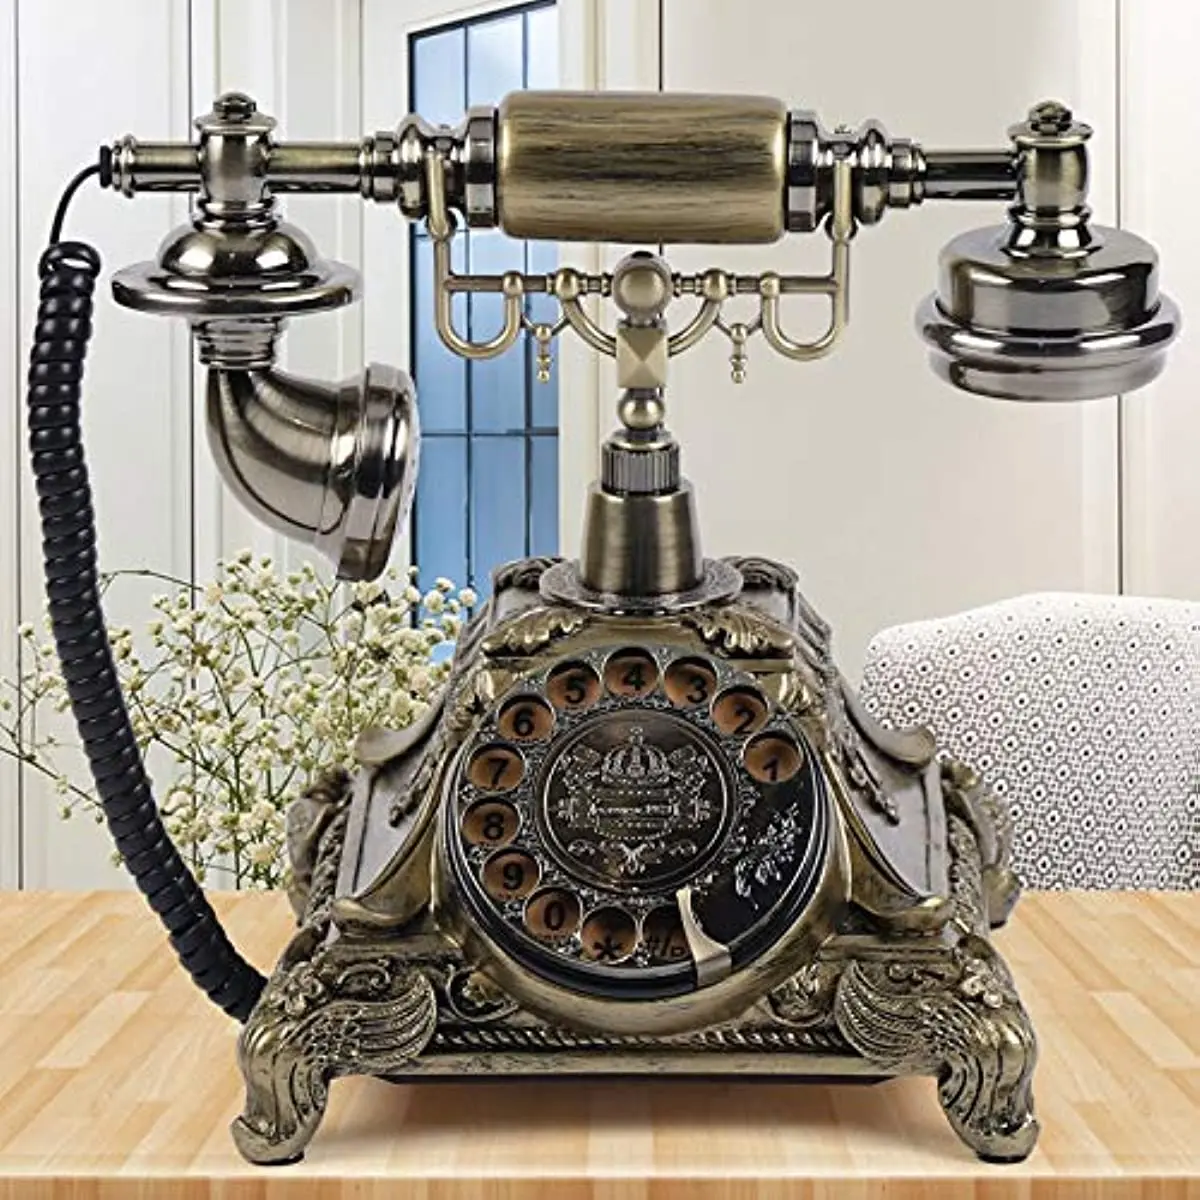 

European Rotary Corded Antique Telephone Old Vintage Rotary Dial Phone Handset Turntable Telephone Office Telephone An